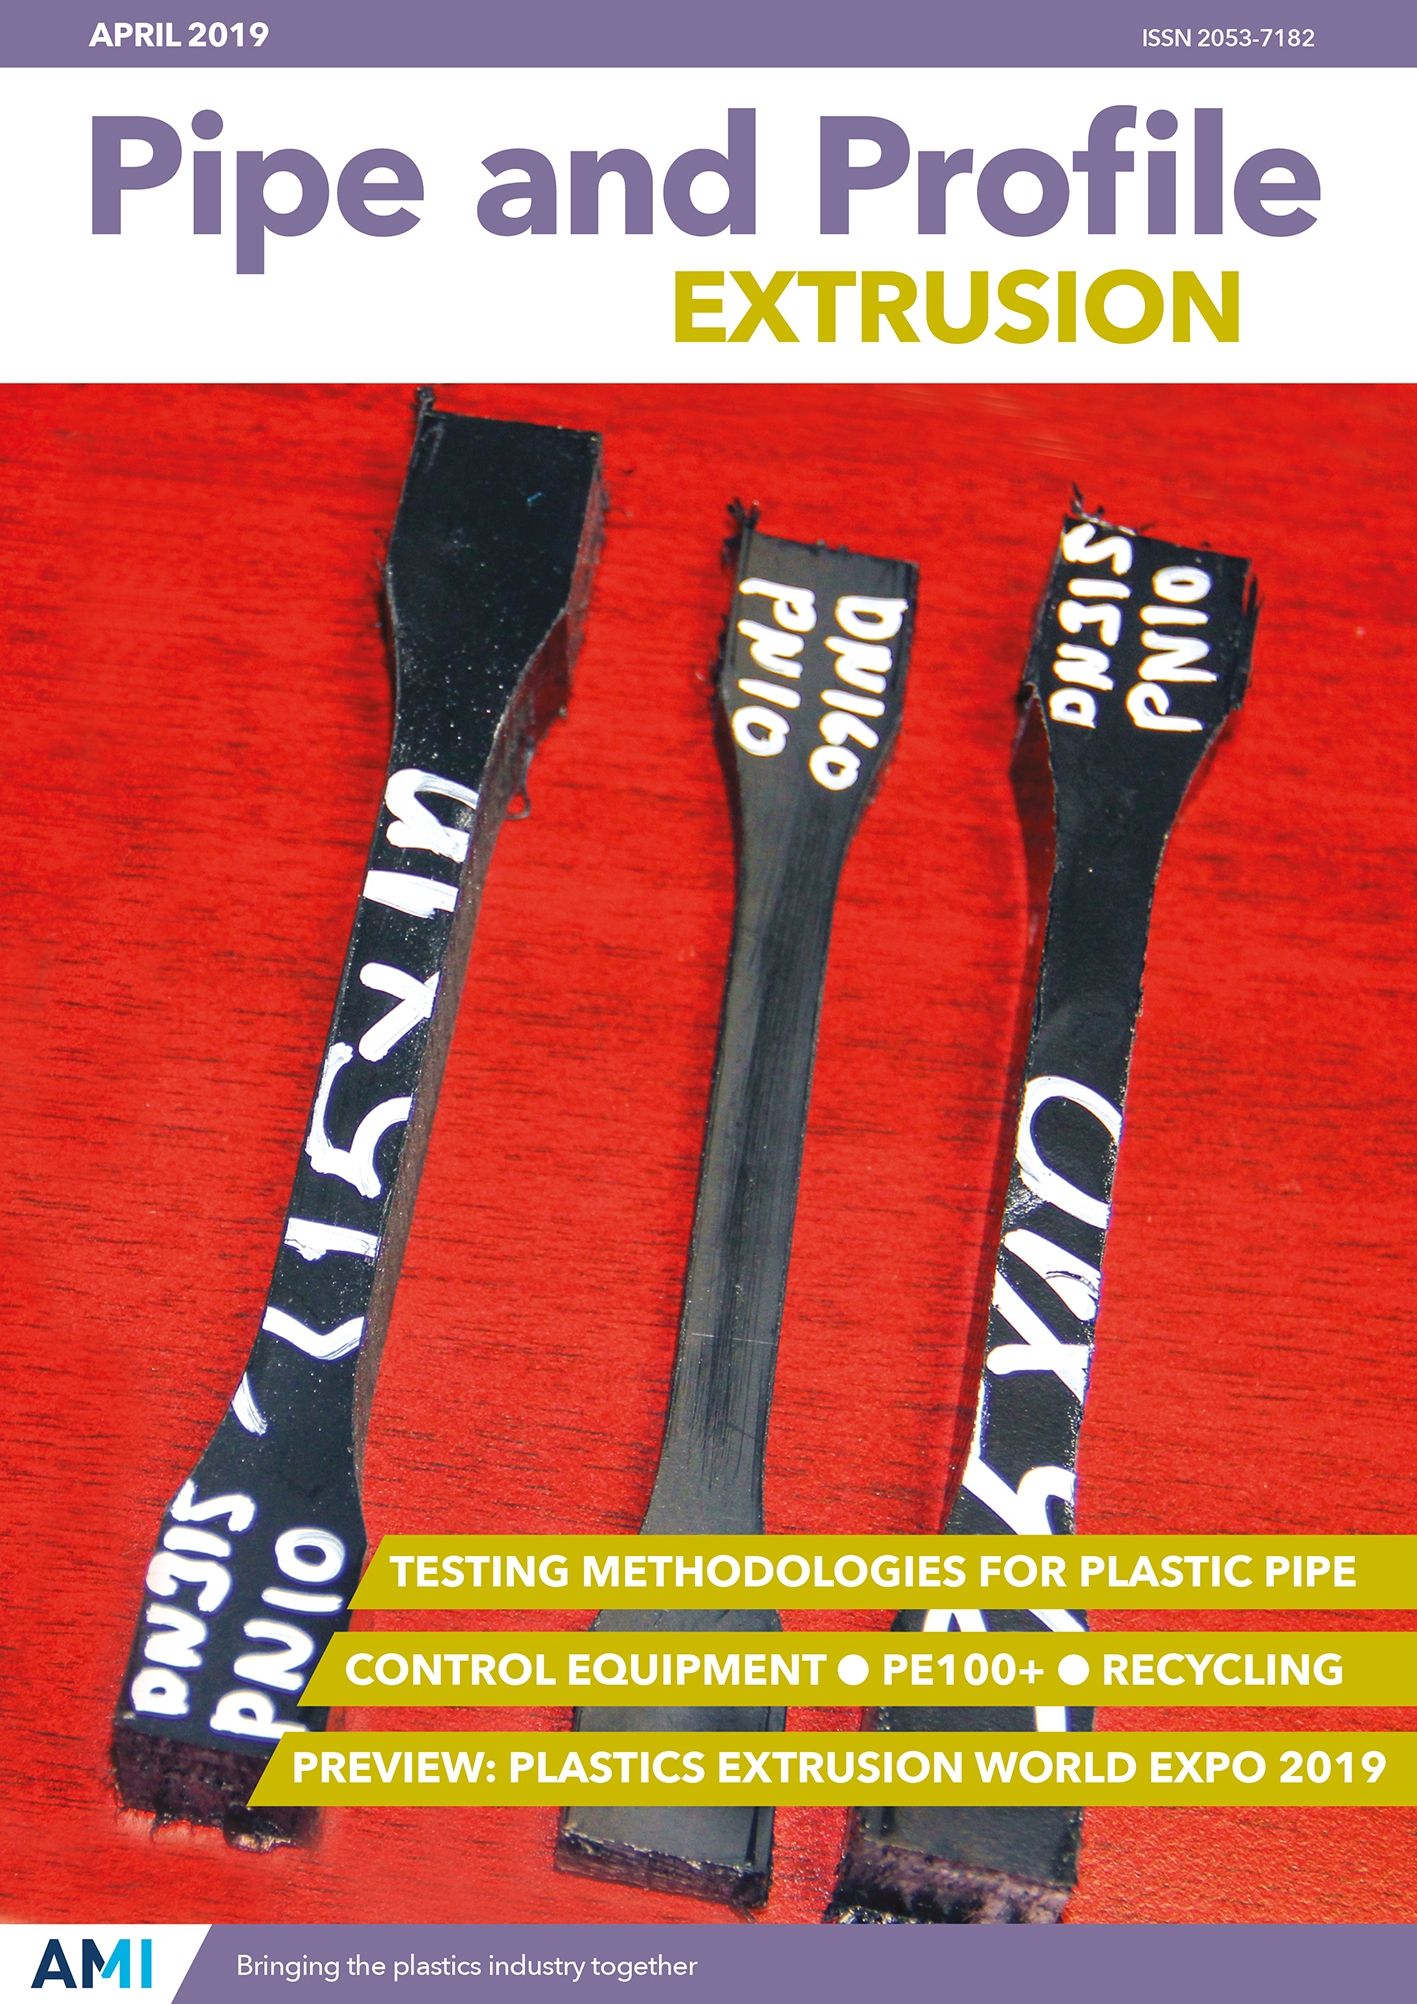 Pipe and Profile Extrusion April 2019